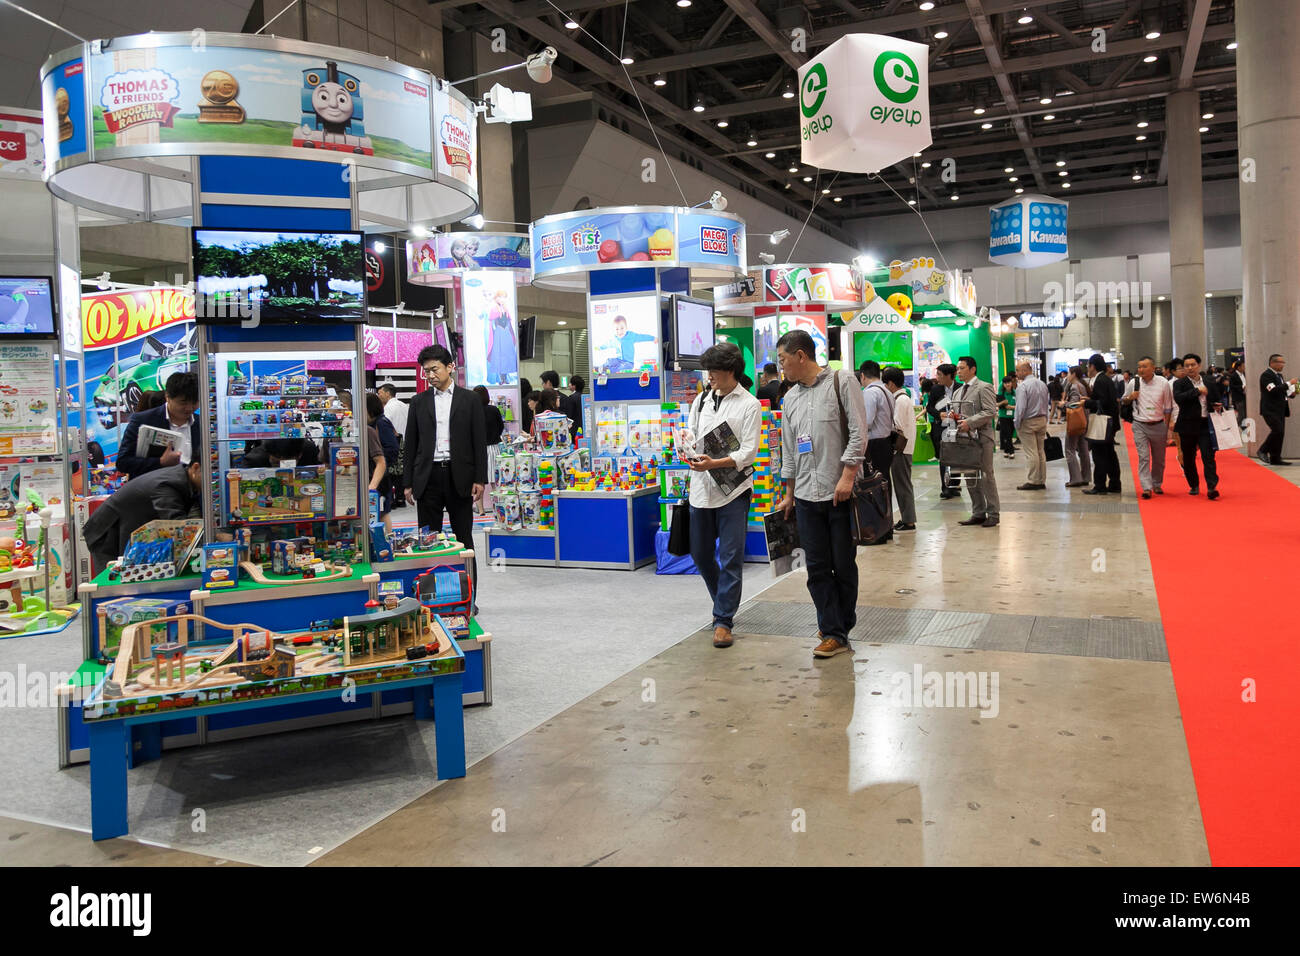 Visitors gather at the International Tokyo Toy Show 2015 in Tokyo Big Sight on June 18, 2015, Tokyo, Japan. Japan's largest trade show for toy makers attracts buyers and collectors by introducing the latest products from different toymakers from Japan and overseas. The toy fair showcases about 35,000 toys from 149 domestic and foreign companies and is held over four days. © Rodrigo Reyes Marin/AFLO/Alamy Live News Stock Photo